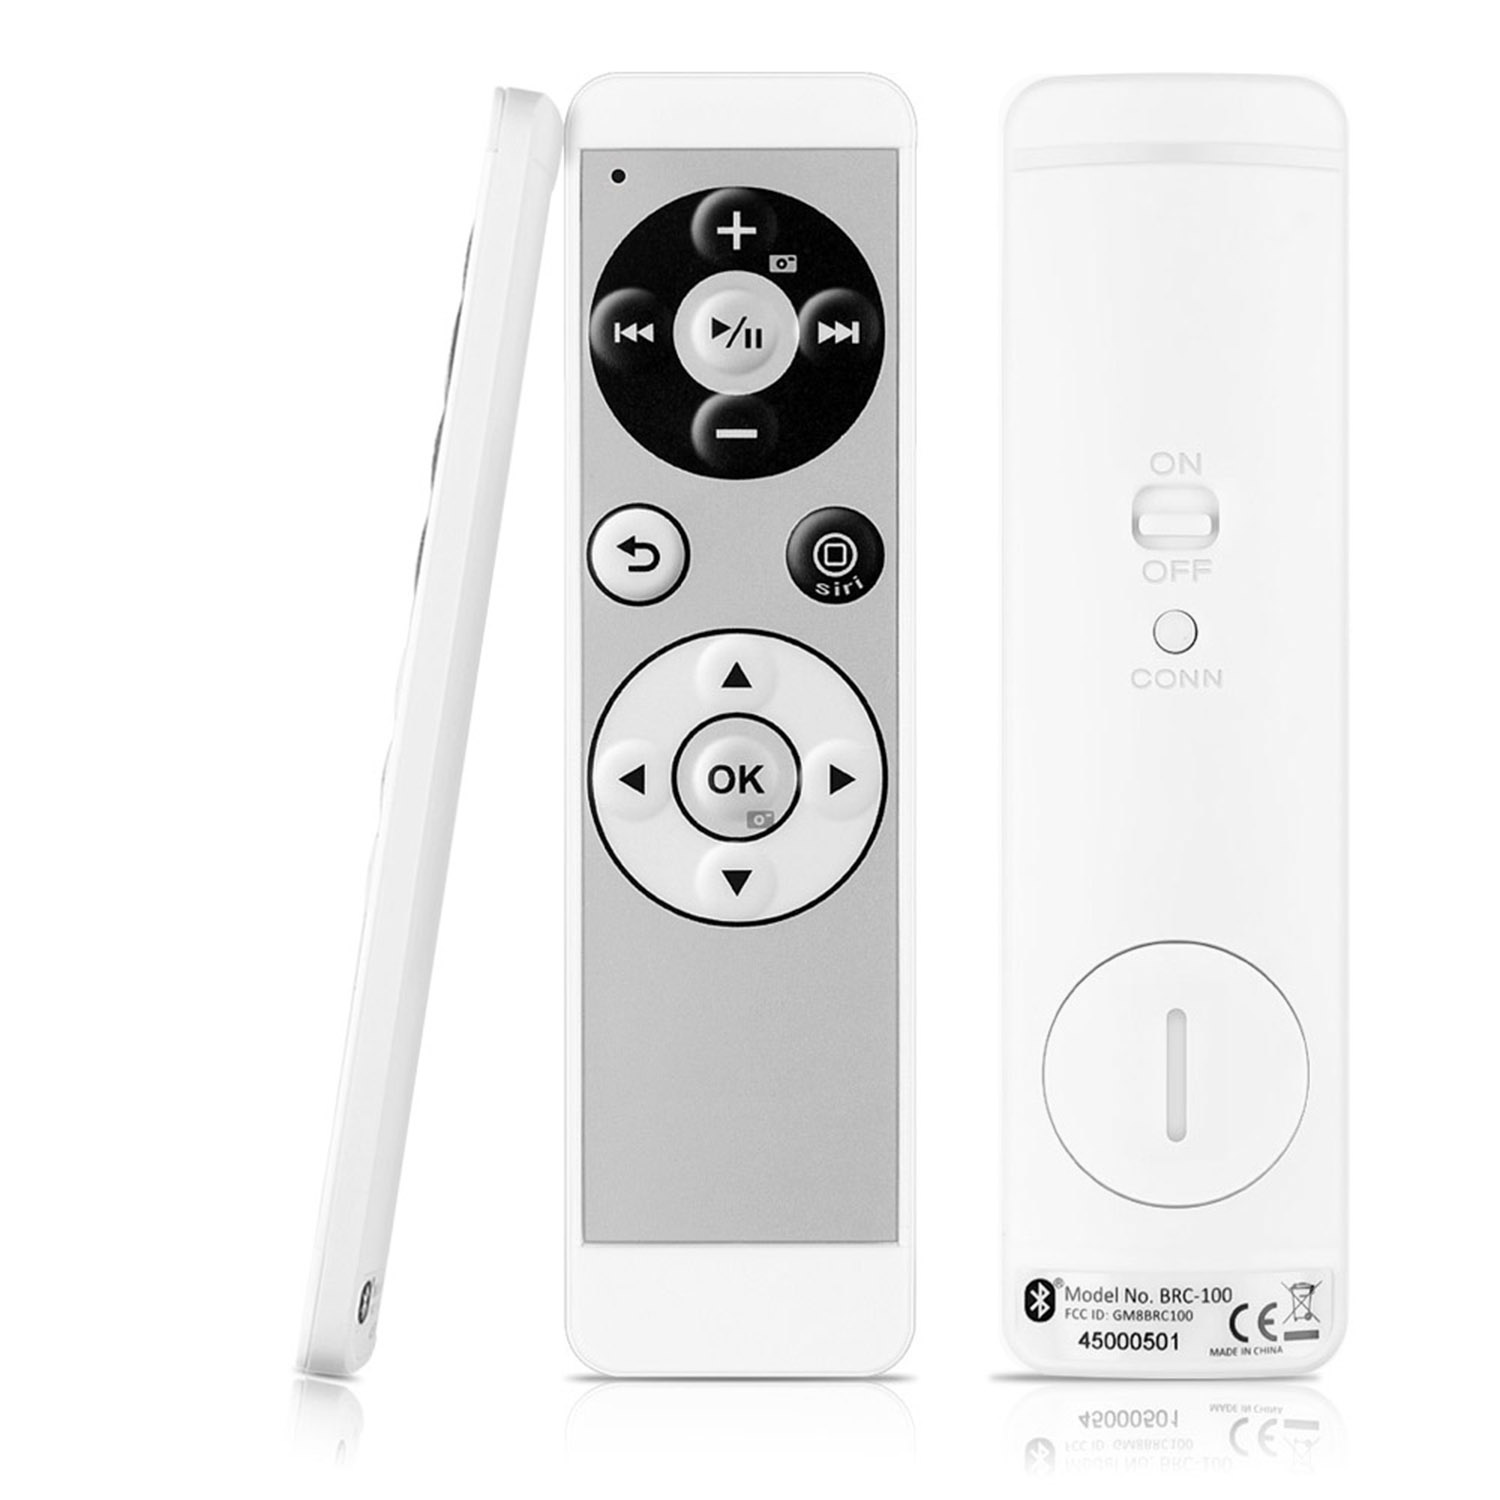 presentation remote for android phone